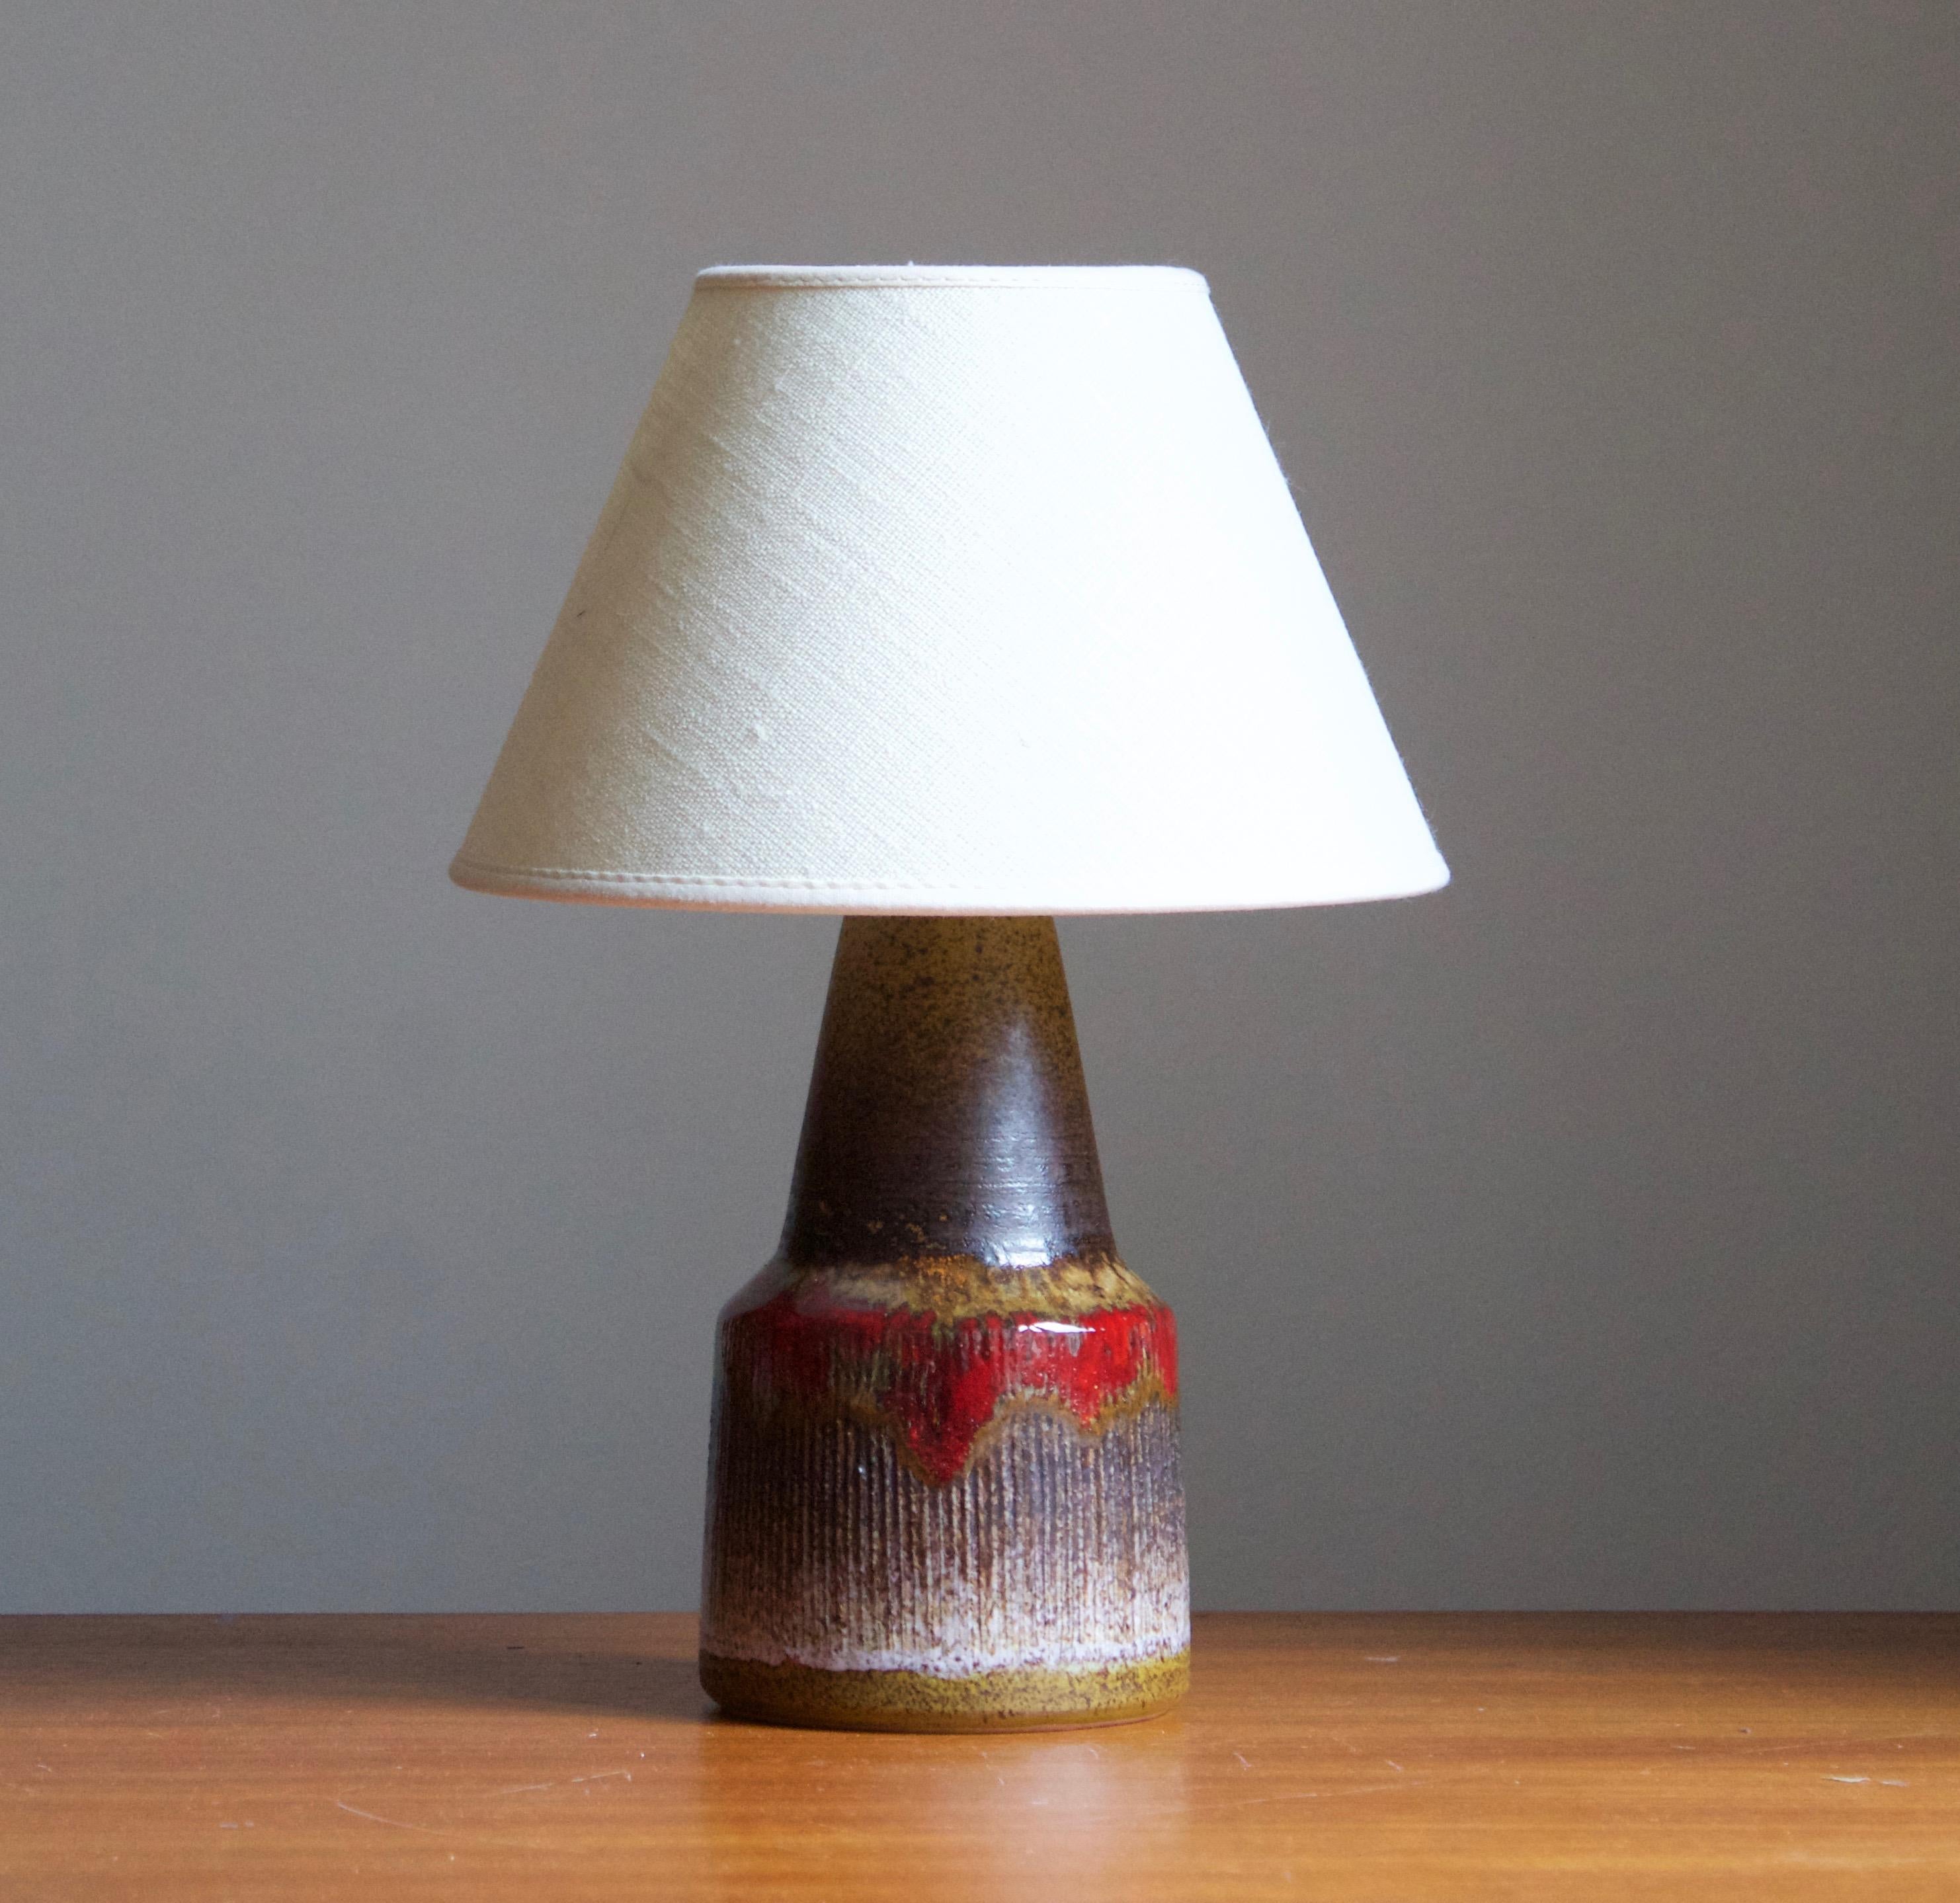 A glazed stoneware table lamp. By Tilgmans Keramik, 1950s. Features a complex glaze combined with incised decor in a style iconic to the producer.

Stated dimensions exclude lampshade. Height includes socket. Sold without lampshade.

Glaze features